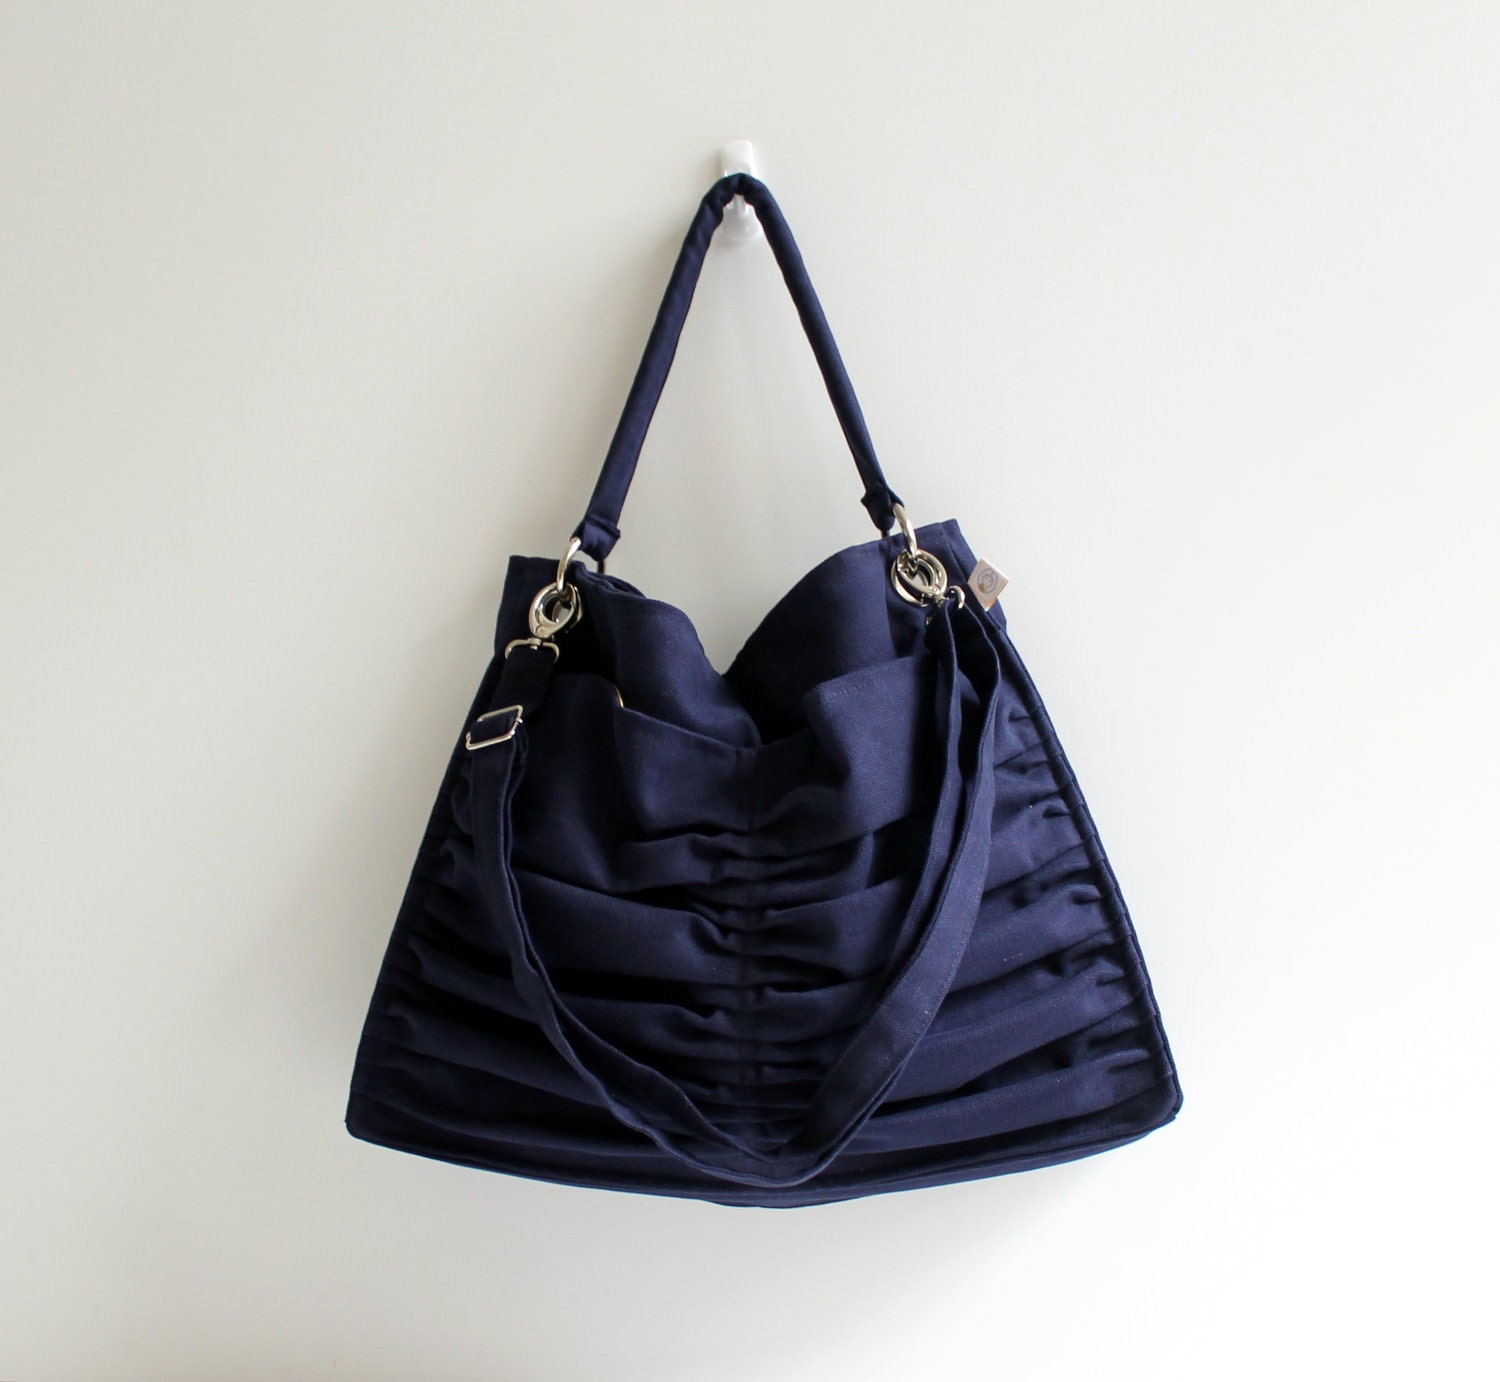 Fashion / Euphoria in Dark Midnight Blue / Outside Pockets / Pleated Shoulder Bag / Messenger Travel Bag / Large / Cross Body / Choose Color - bayanhippo